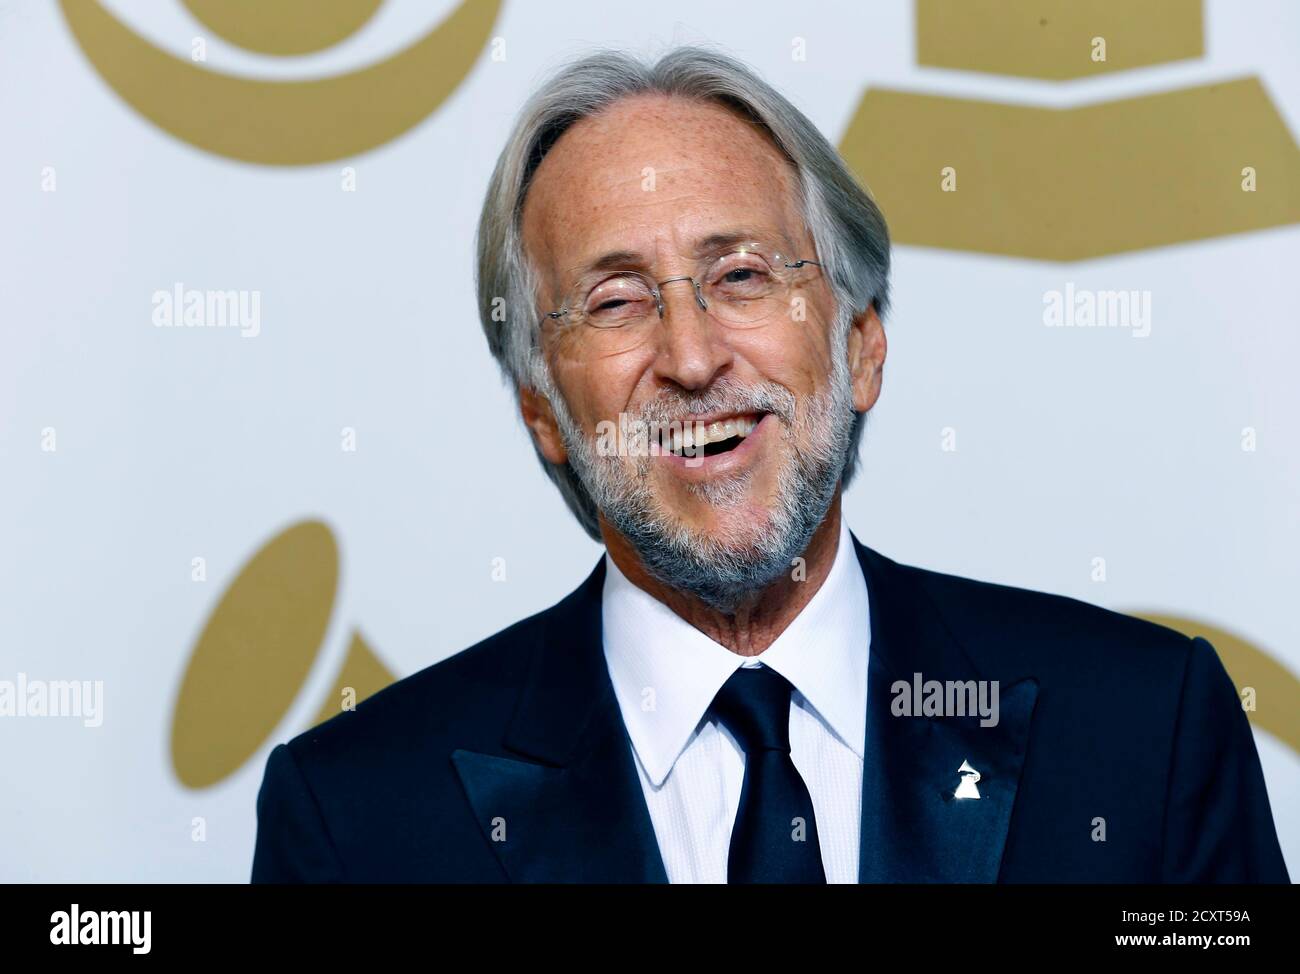 Neil Portnow, president of the National Academy of Recording Arts and Sciences, poses in the press room at the 57th annual Grammy Awards in Los Angeles, California February 8, 2015.  REUTERS/Mike Blake  (UNITED STATES - TAGS: ENTERTAINMENT) (GRAMMYS-BACKSTAGE) Stock Photo